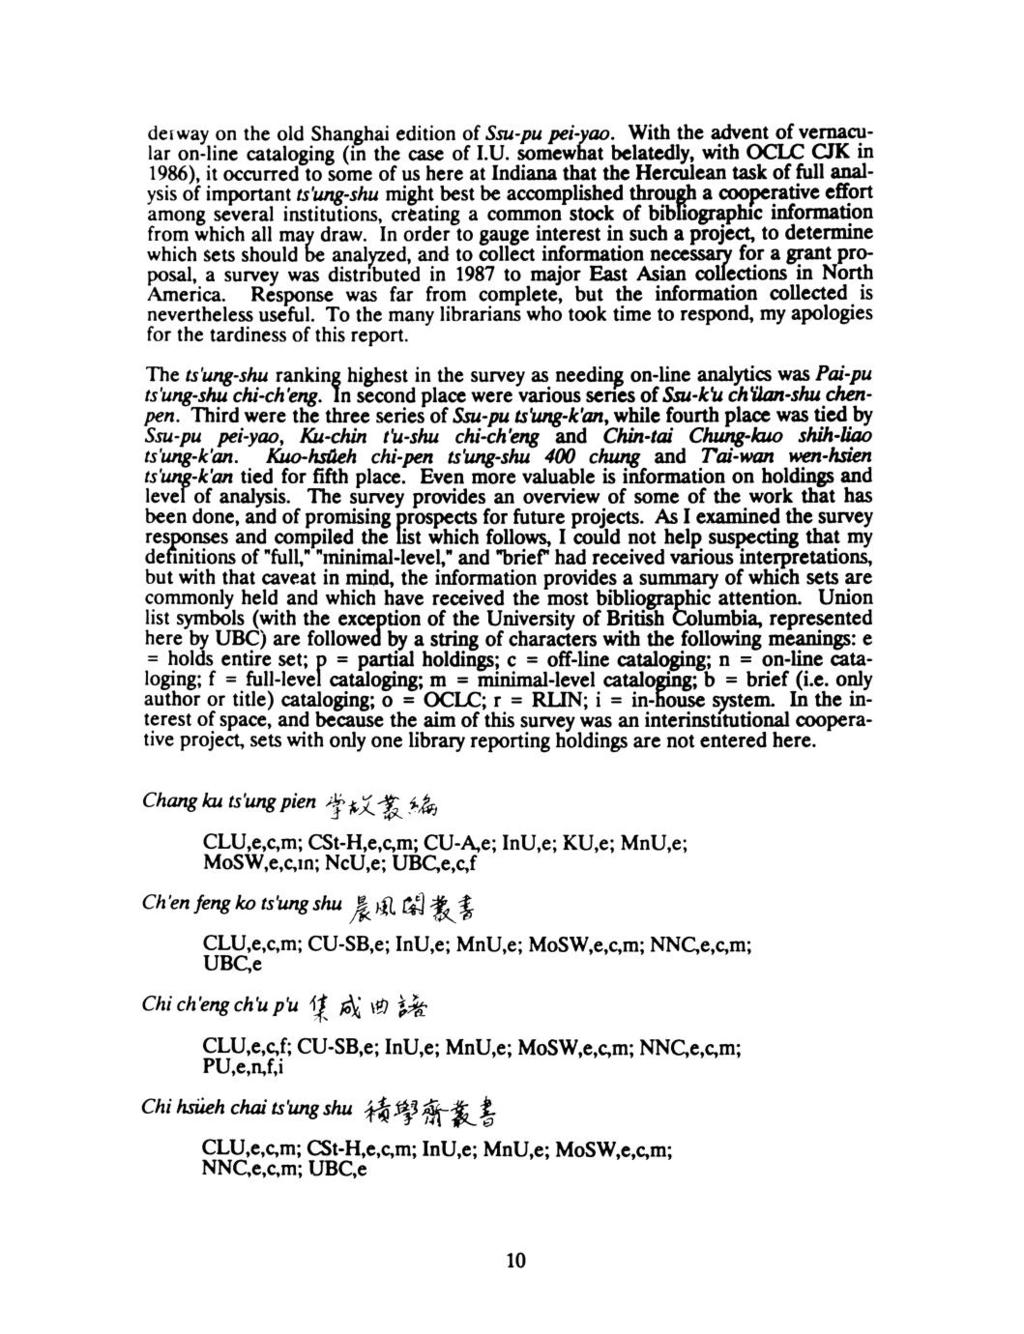 derway on the old Shanghai edition of Ssu-pu pei-yao. With the advent of vernacular on-line cataloging (in the case of I.U.